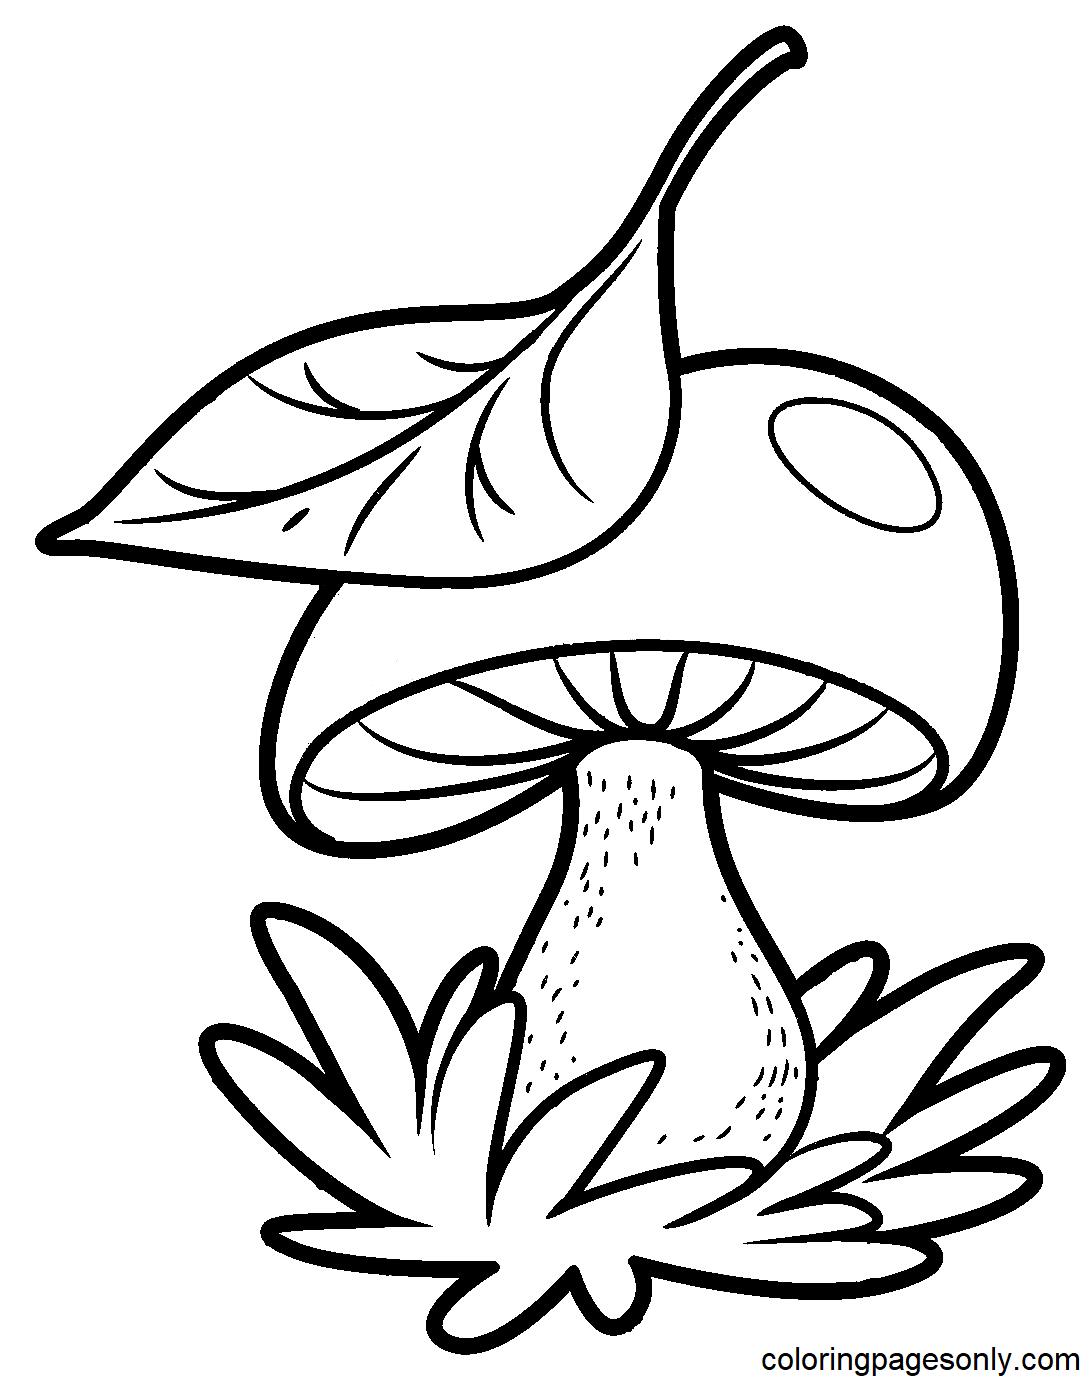 Mushroom with Leaf Coloring Pages